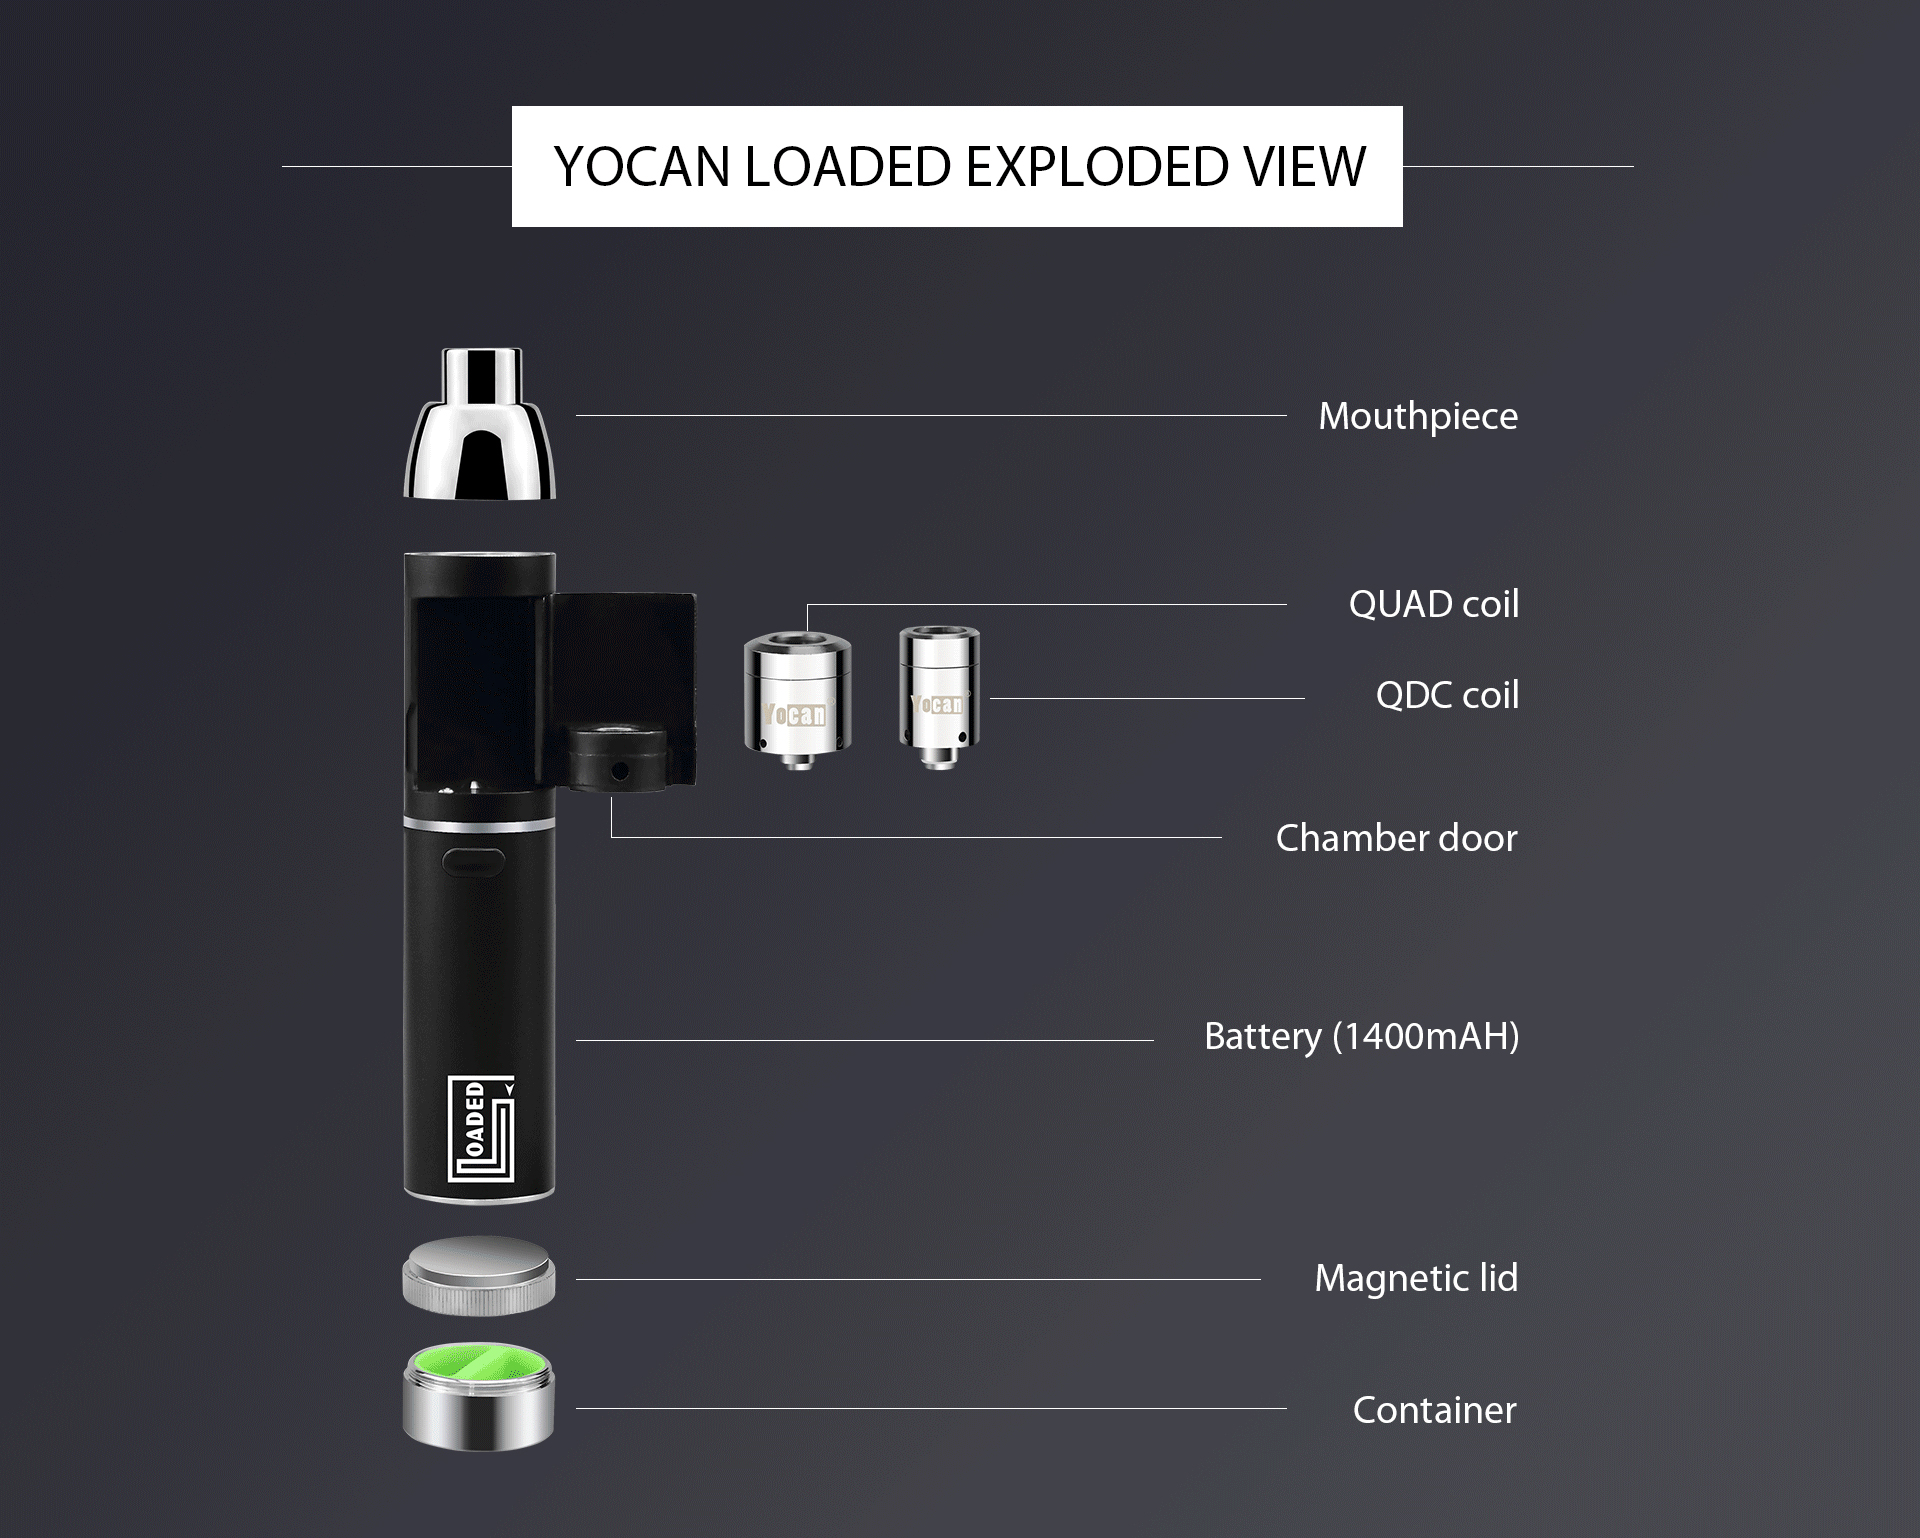 Yocan loaded exploded view.